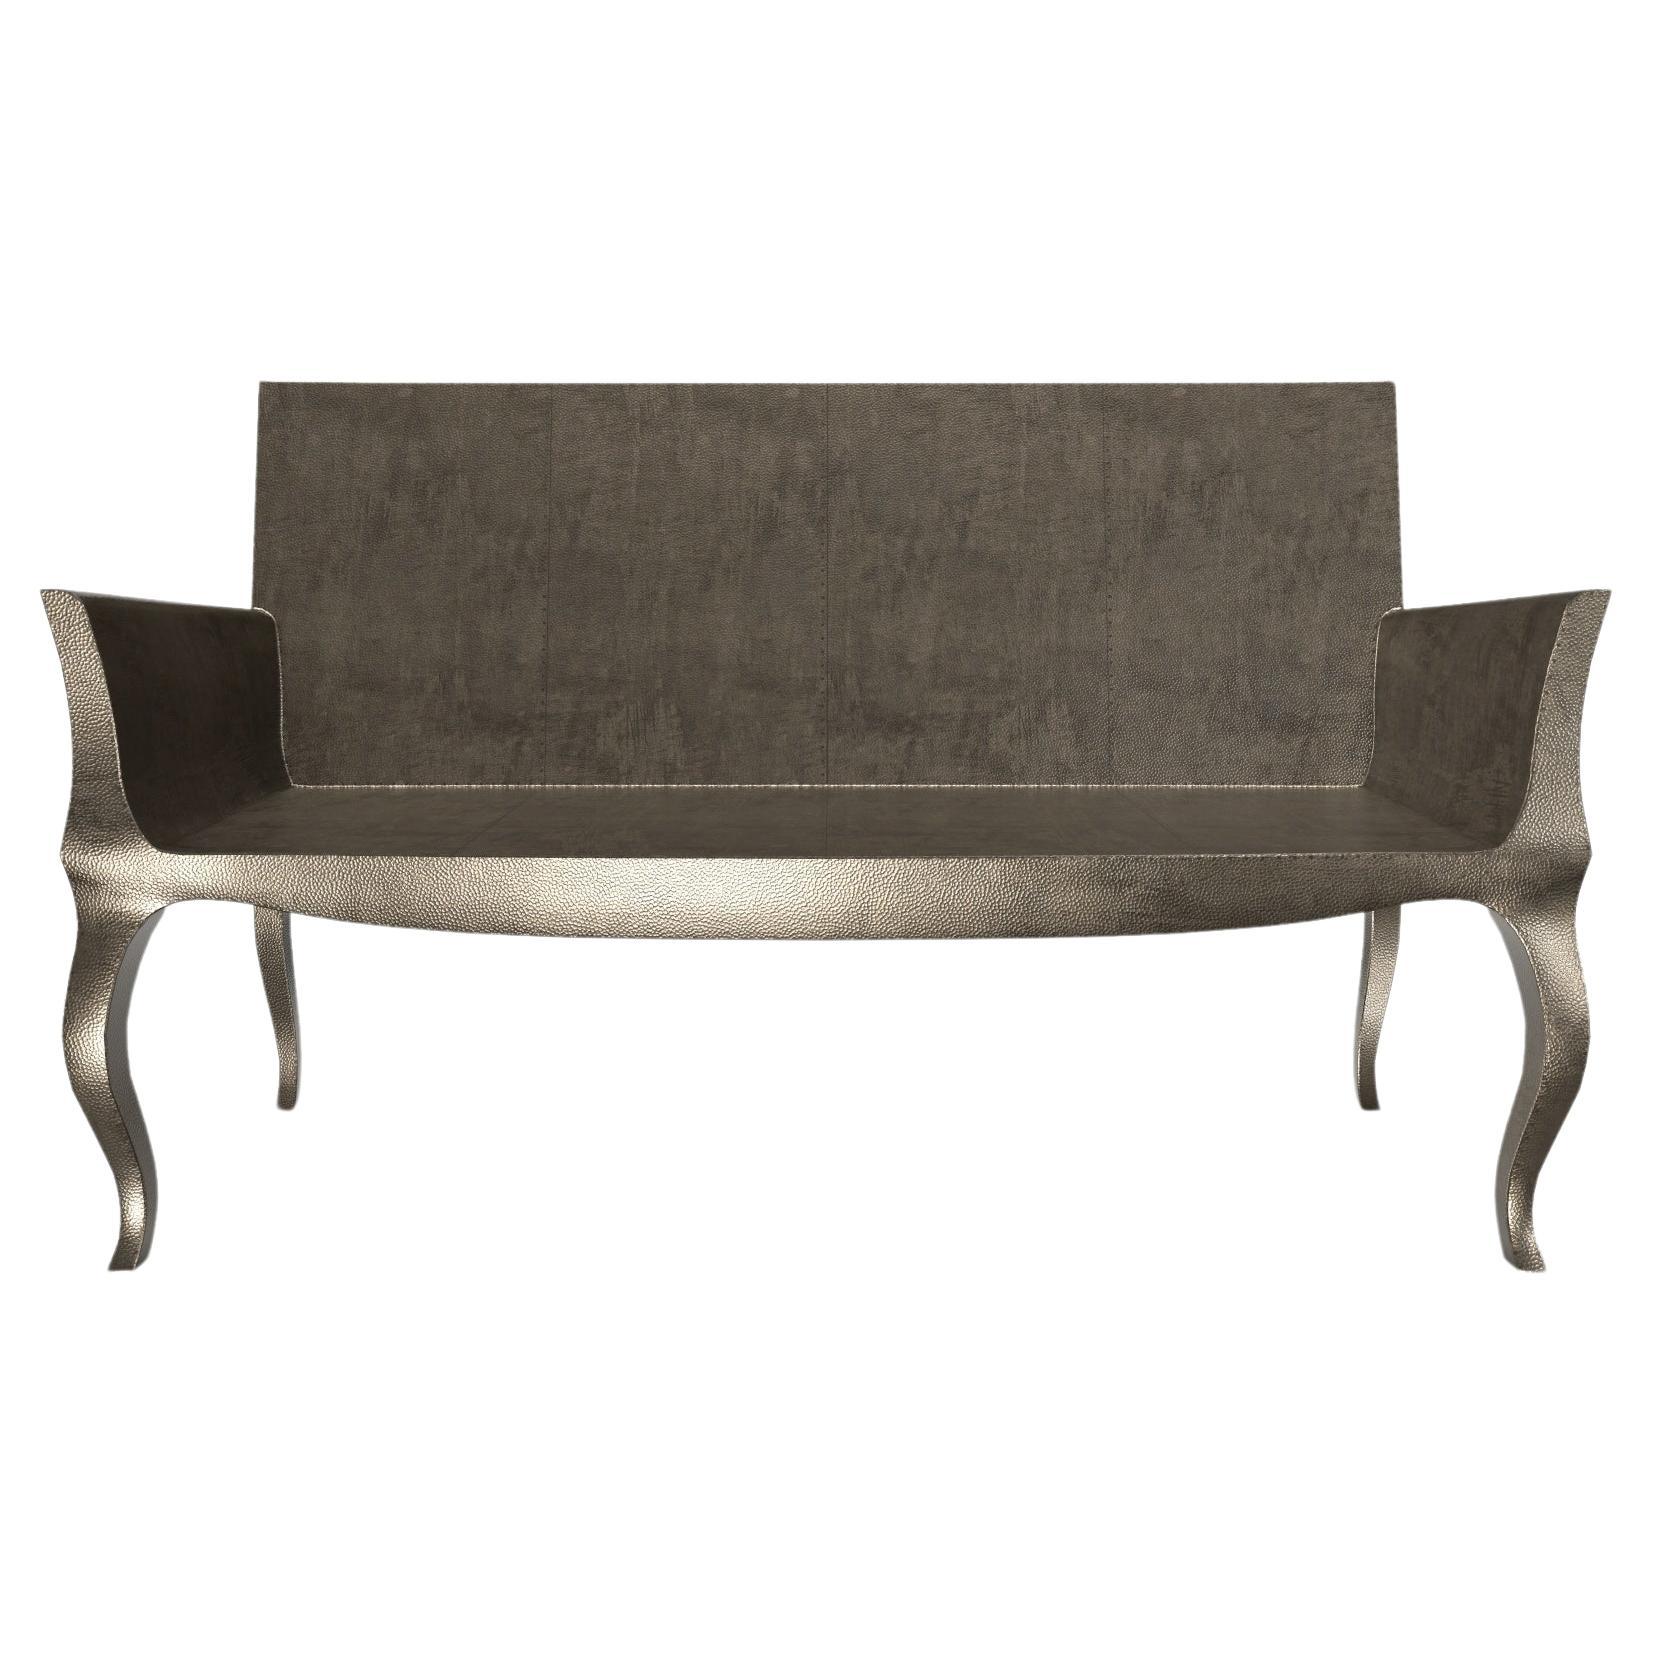 Louise Settee Art Deco Daybeds in Mid. Hammered Antique Bronze by Paul Mathieu 